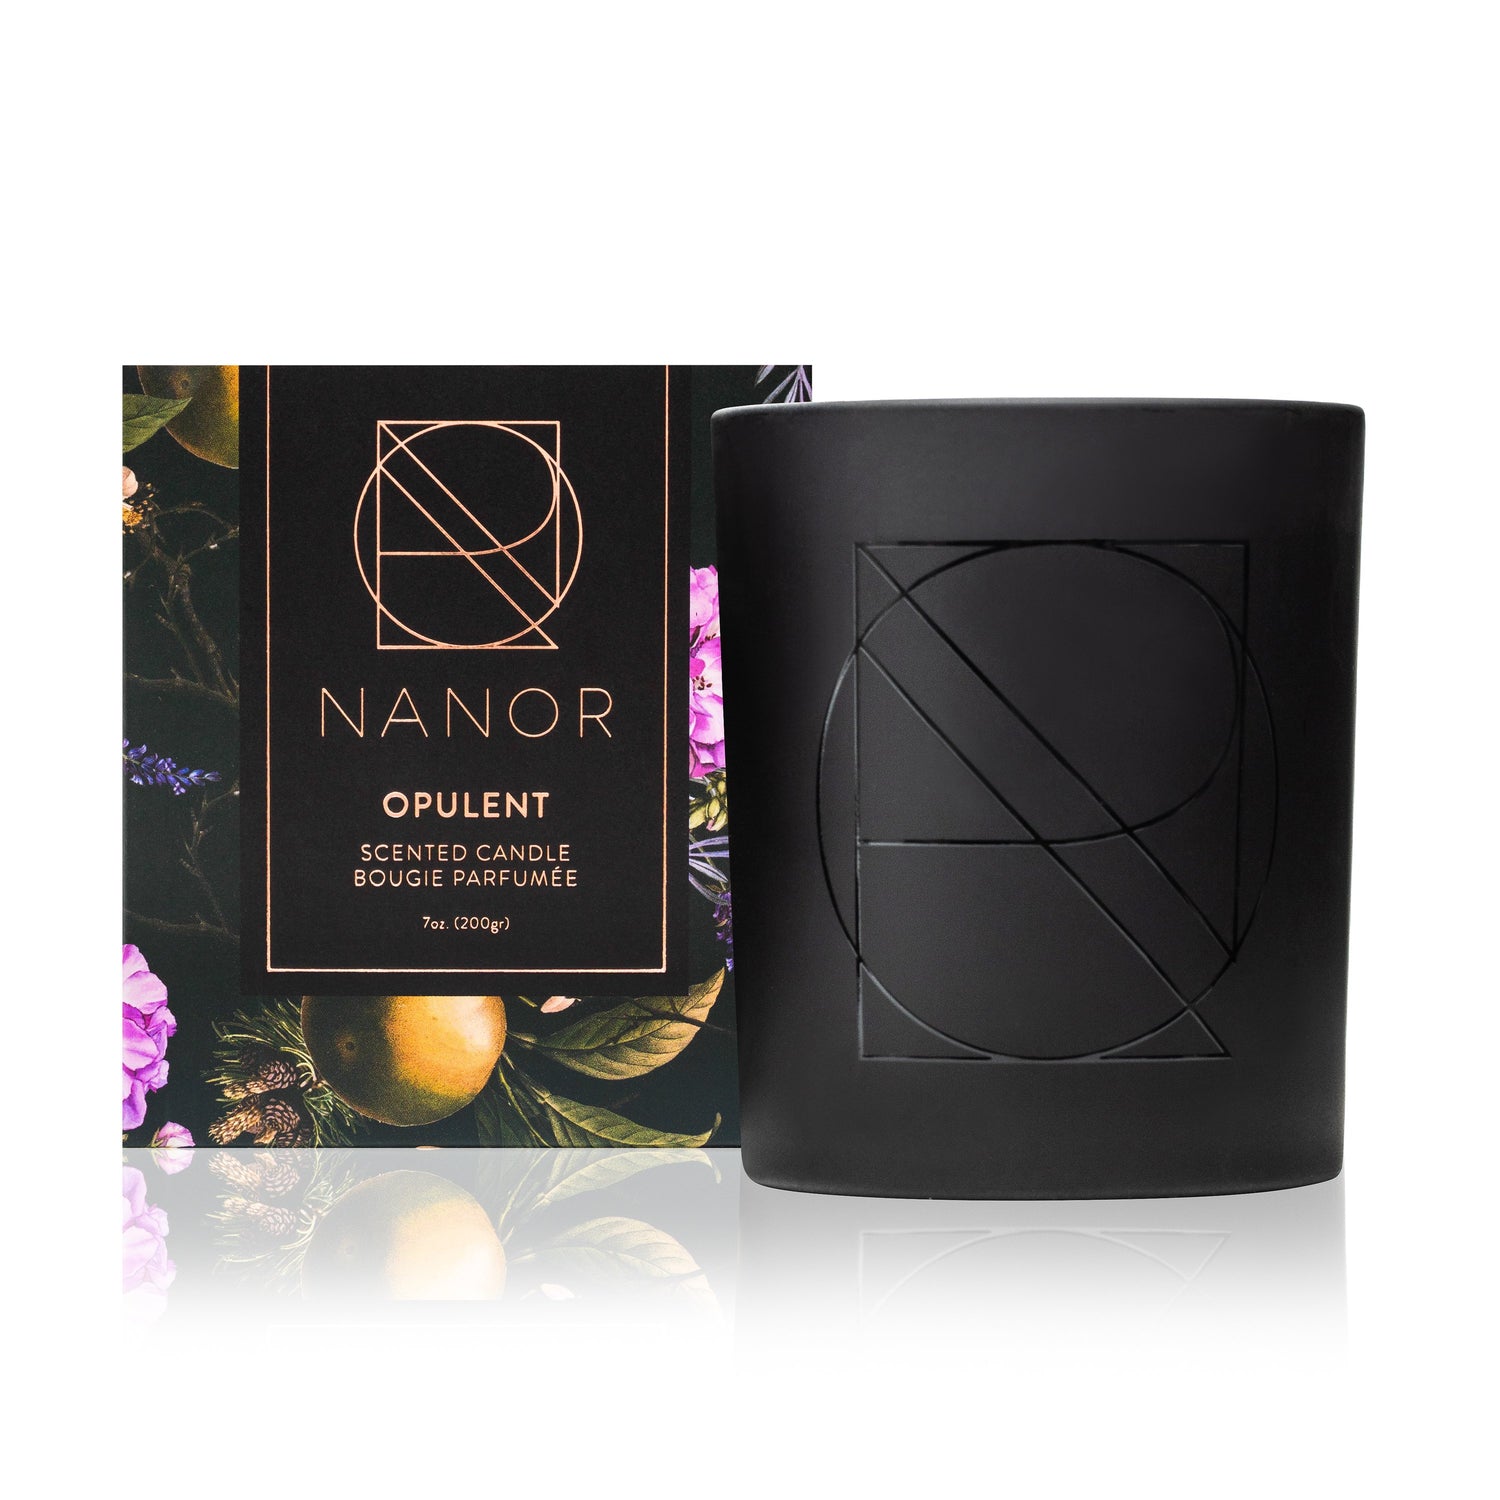 OPULENT Scented Candle - 7oz Candles Nanor